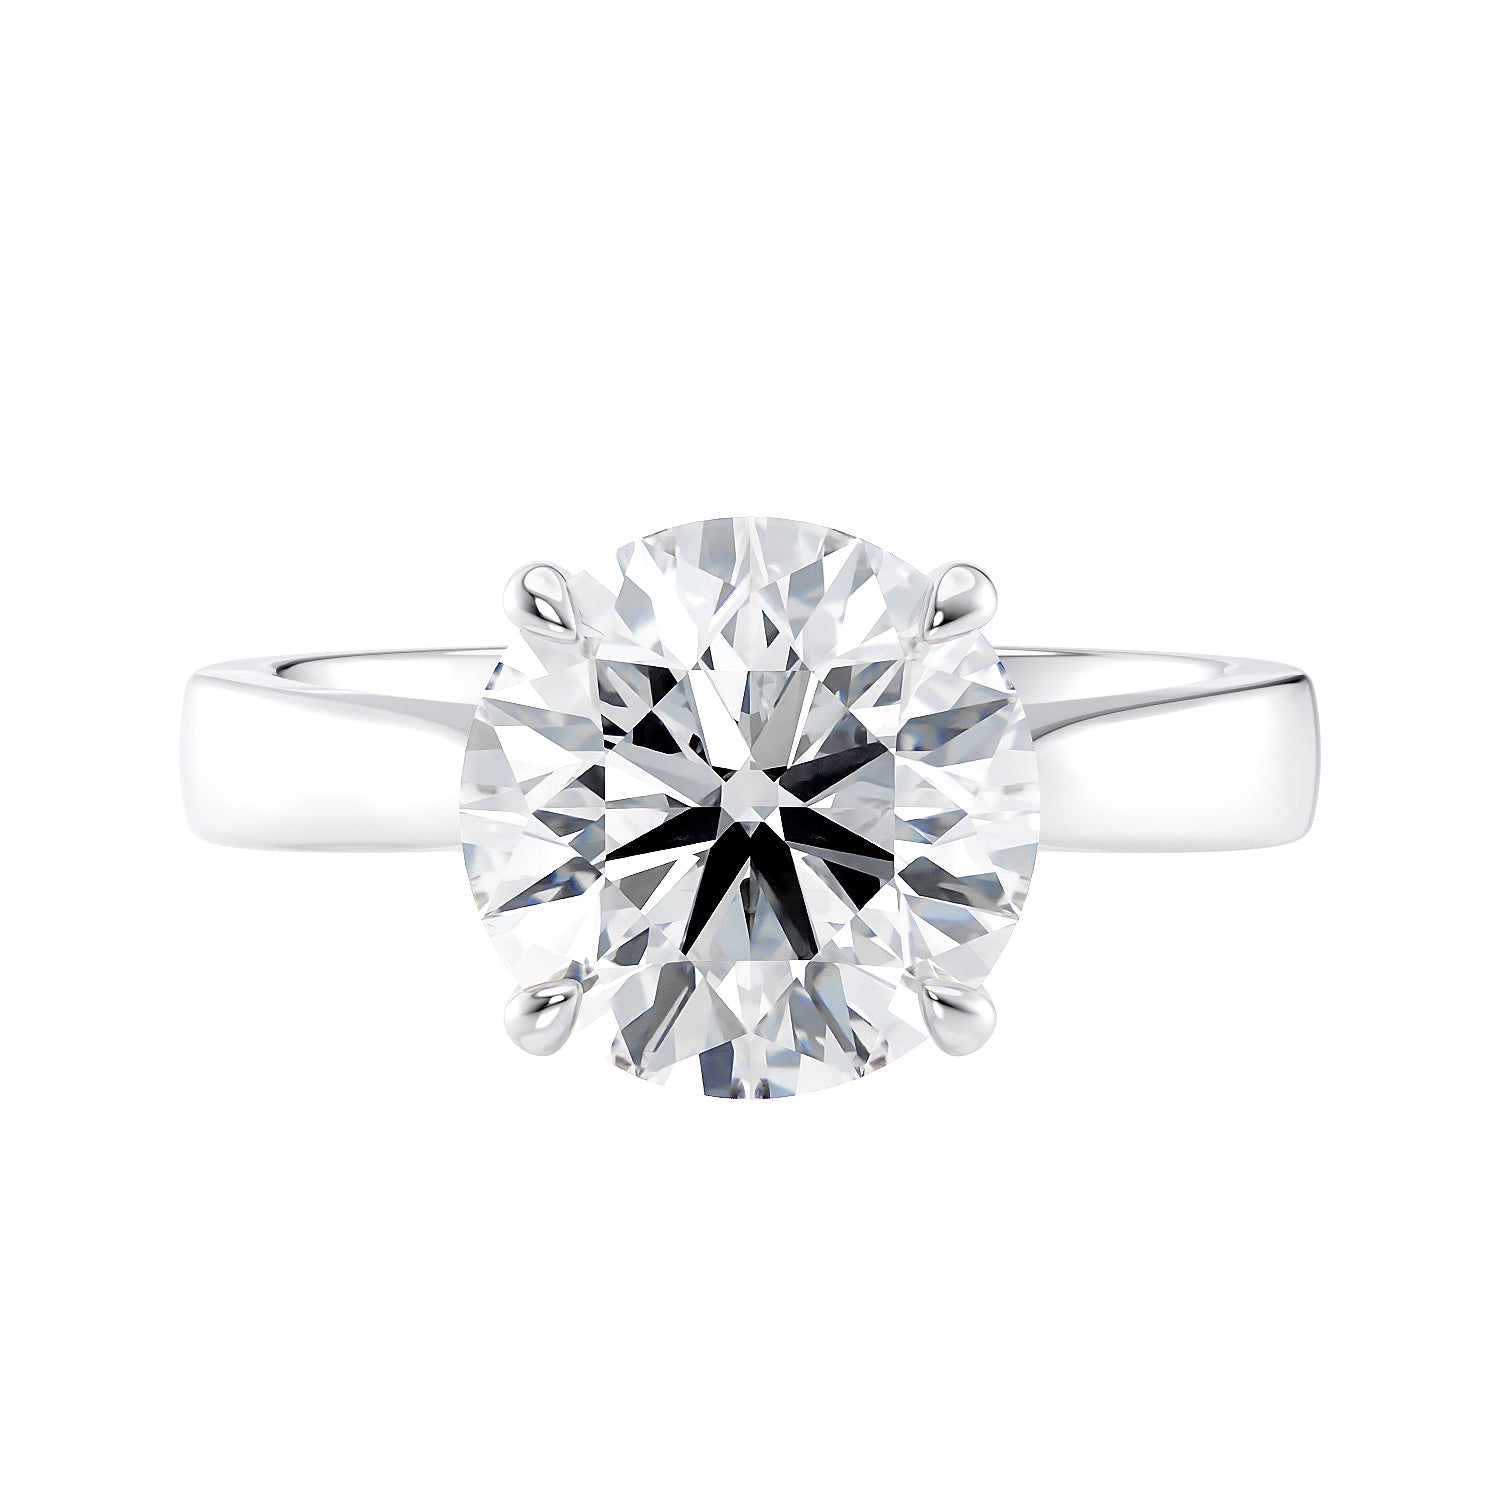 Laboratory grown round diamond solitaire engagement ring with wide white gold band front view.